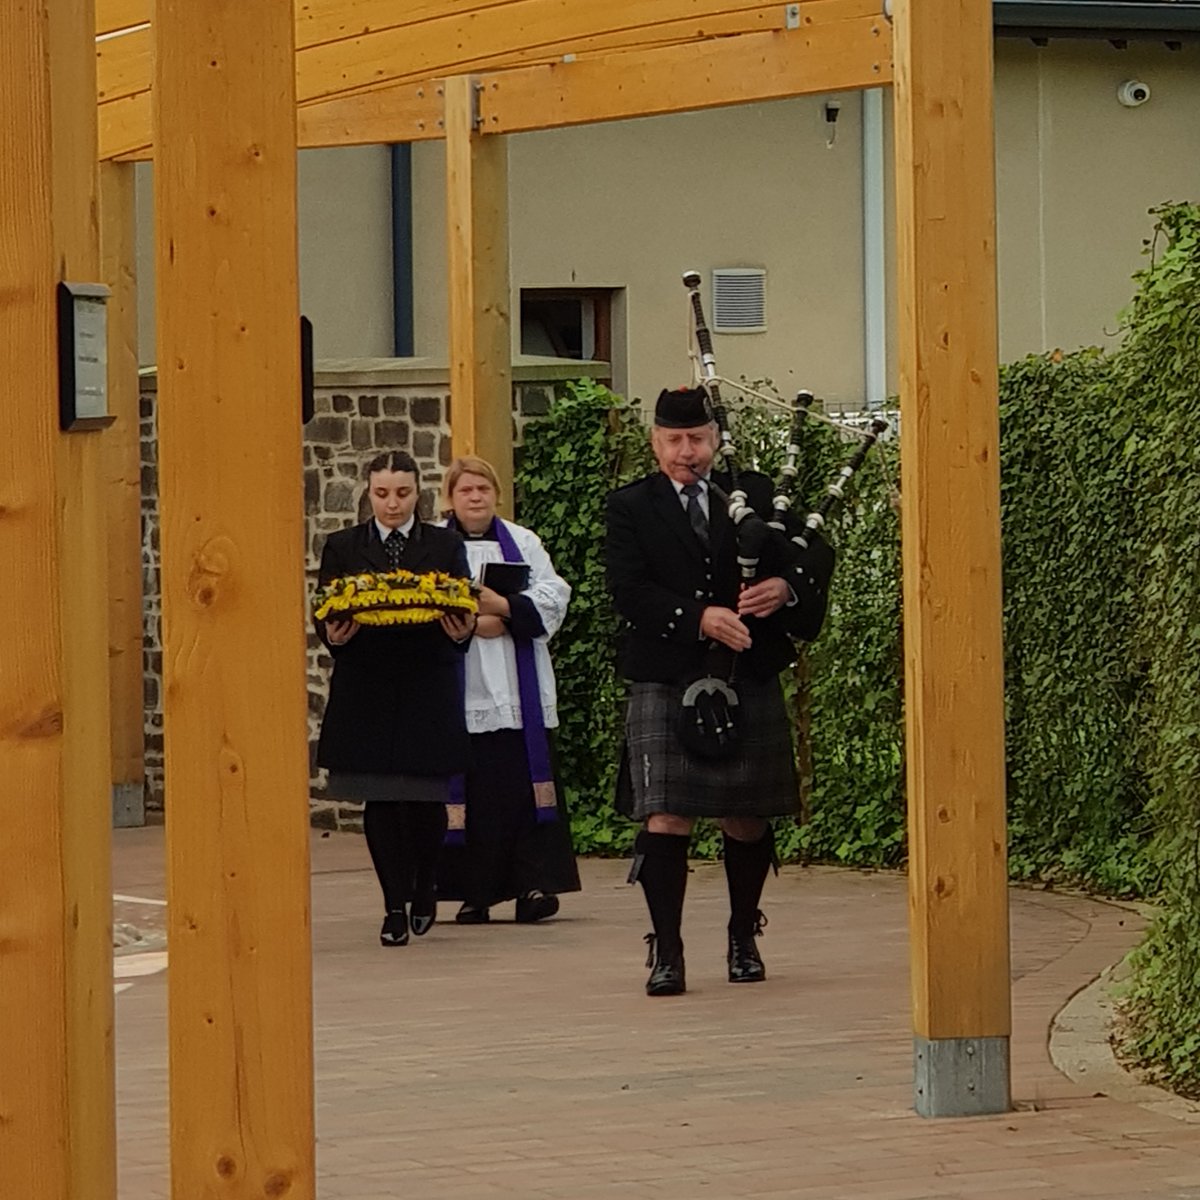 Funeral #Bagpipes @SirhowyValley Crem today for a local lady.  I led to the Chapel with Land of My Fathers & Myfanwy
Chapel entry: Danny Boy. Exit: Calon Lan, Cwm Rhondda & Going Home. Condolences to family.

Working with G Brown FD #Oakdale #Newbridge #Blackwood
 
#BagpiperWales